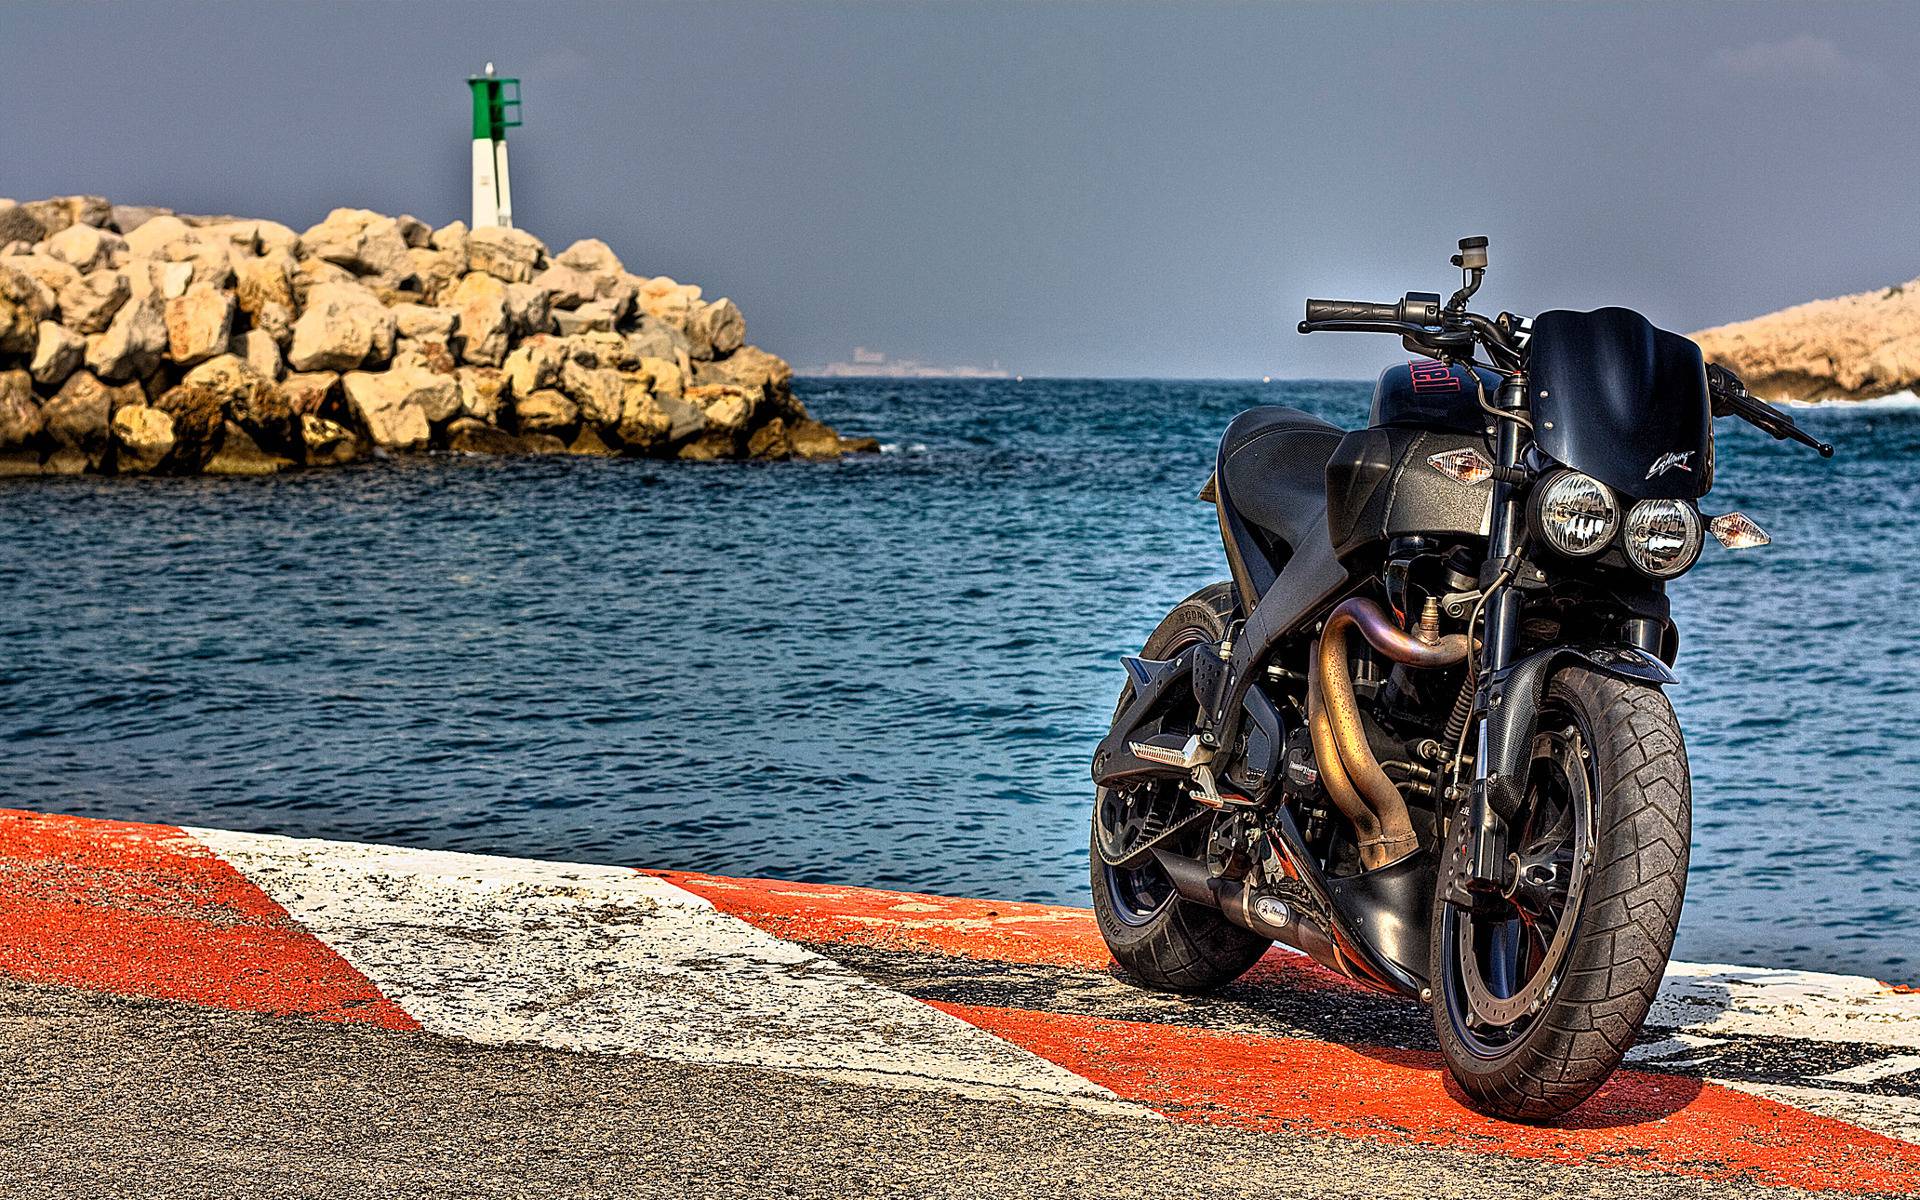 Buell XB12s wallpaper and image, picture, photo